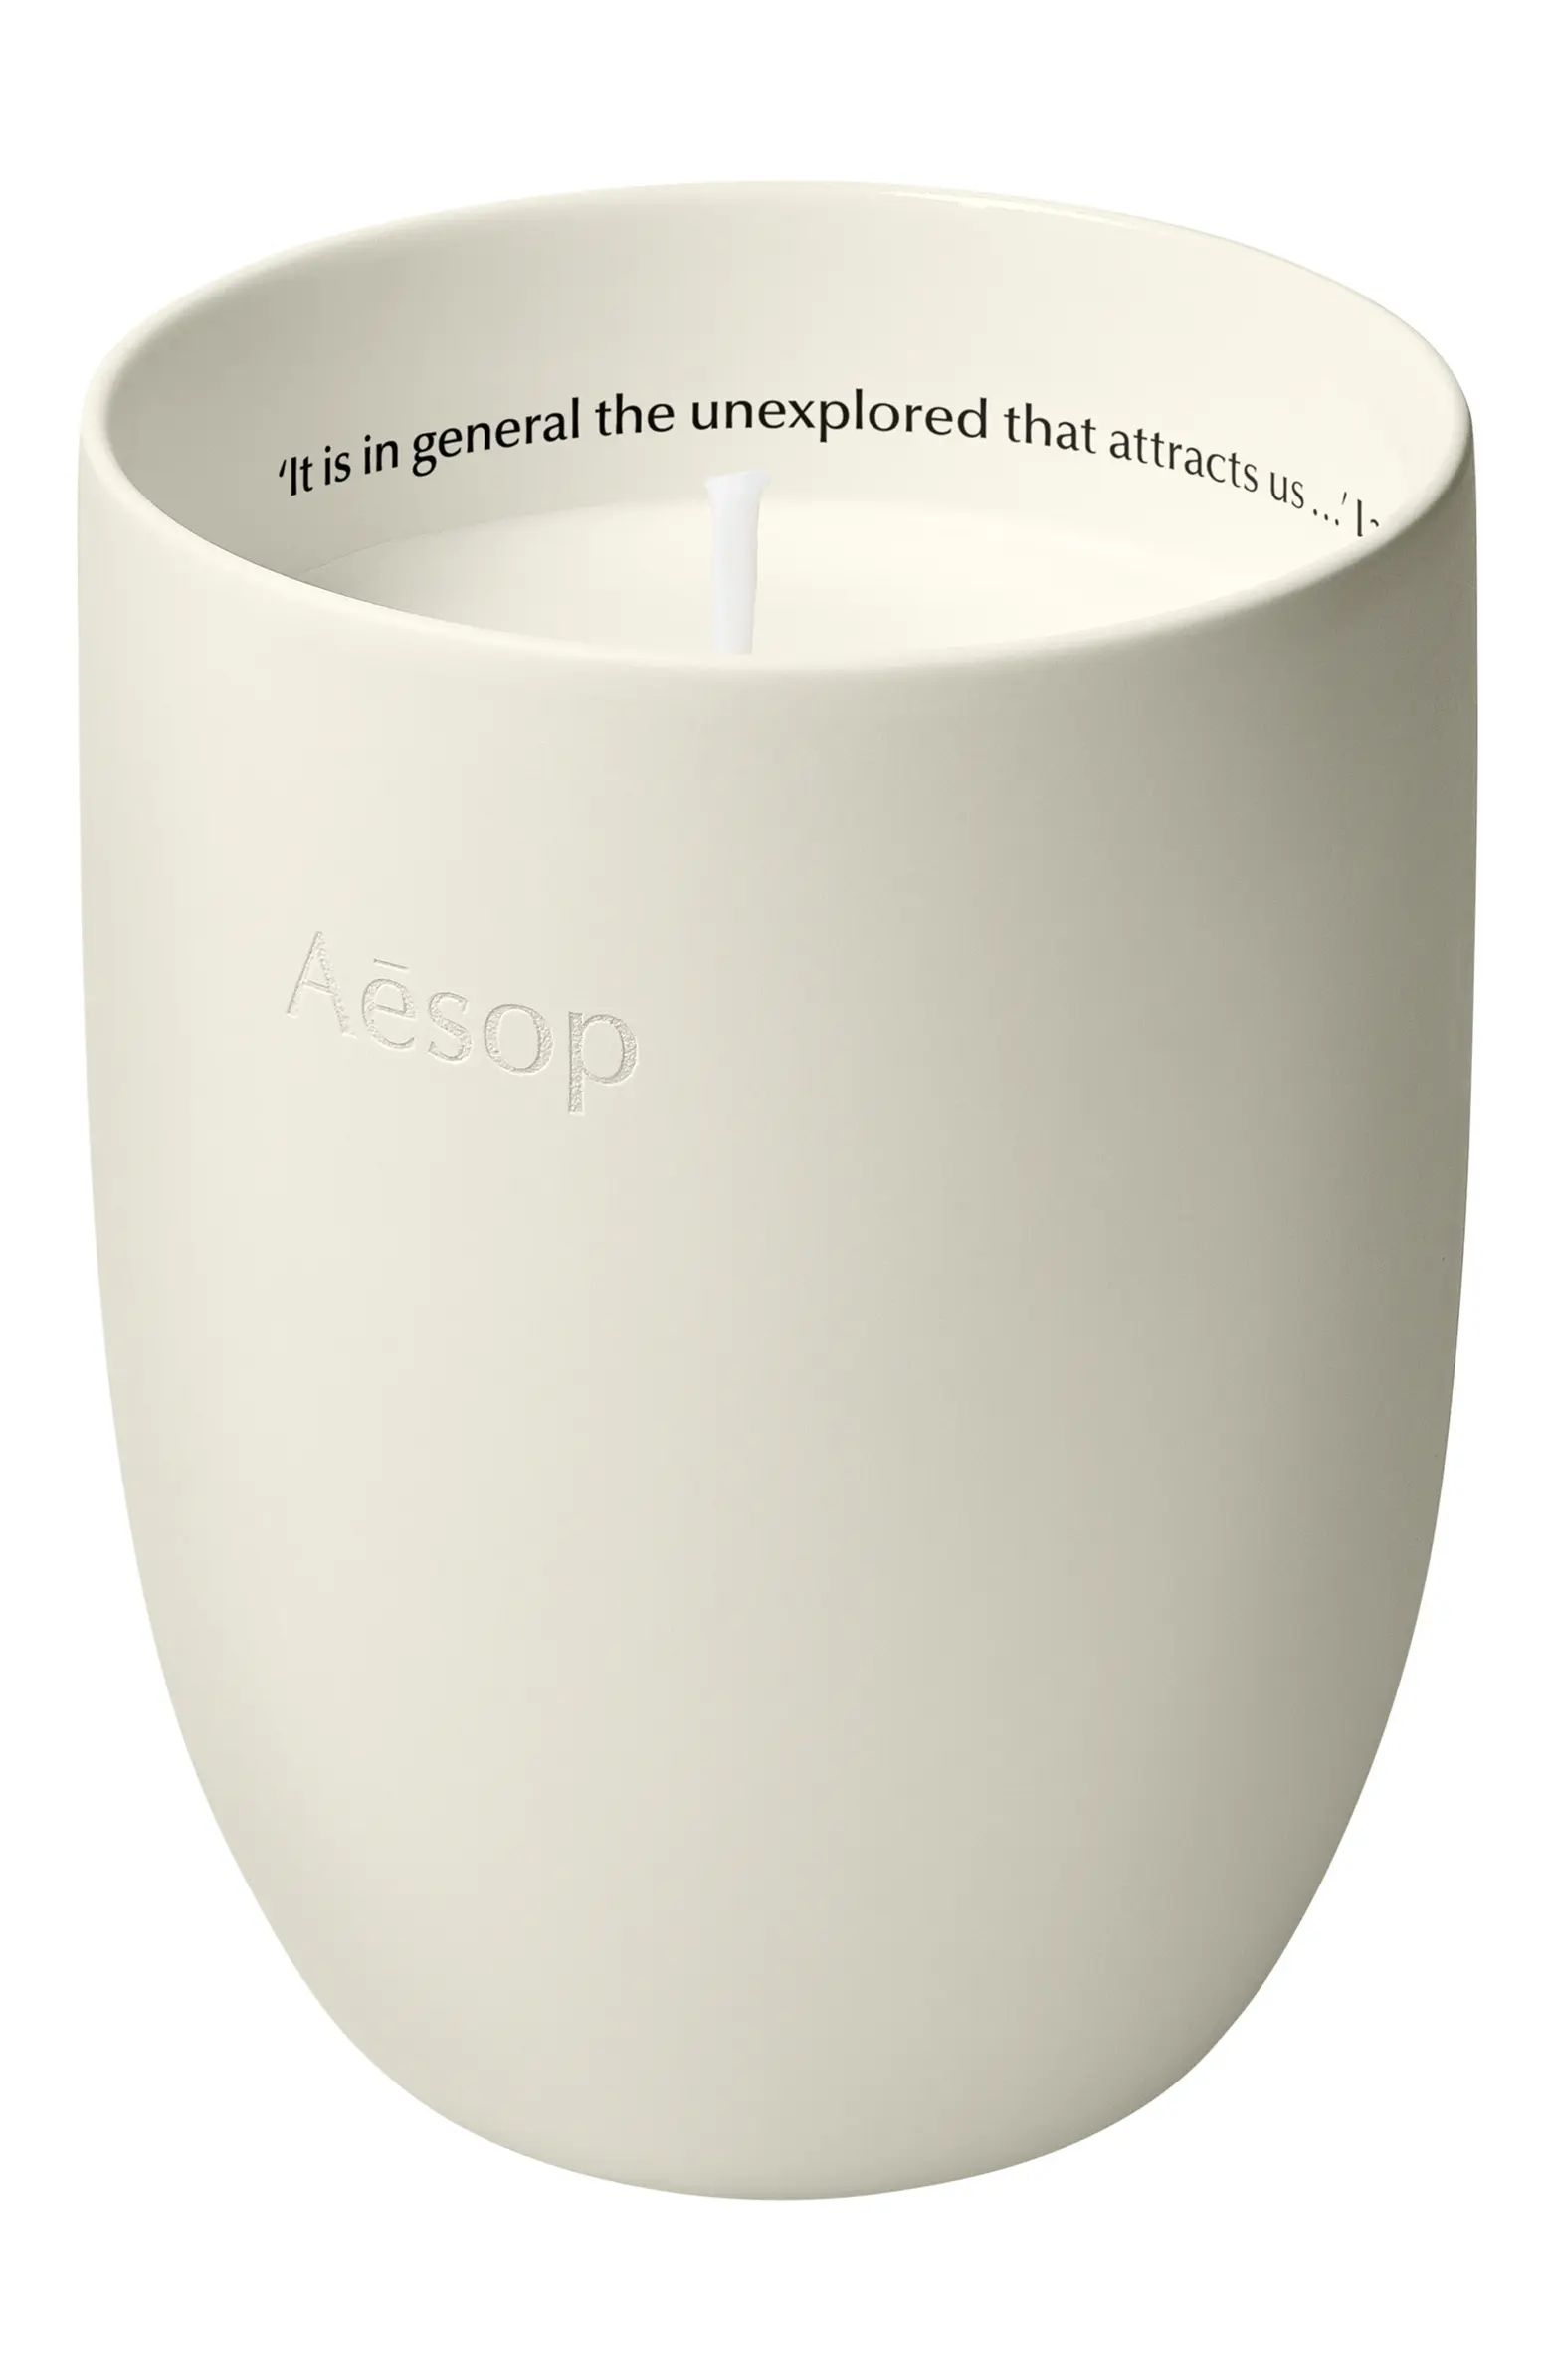 Aesop Aganice Aromatique Scented Candle | Nordstrom | Nordstrom